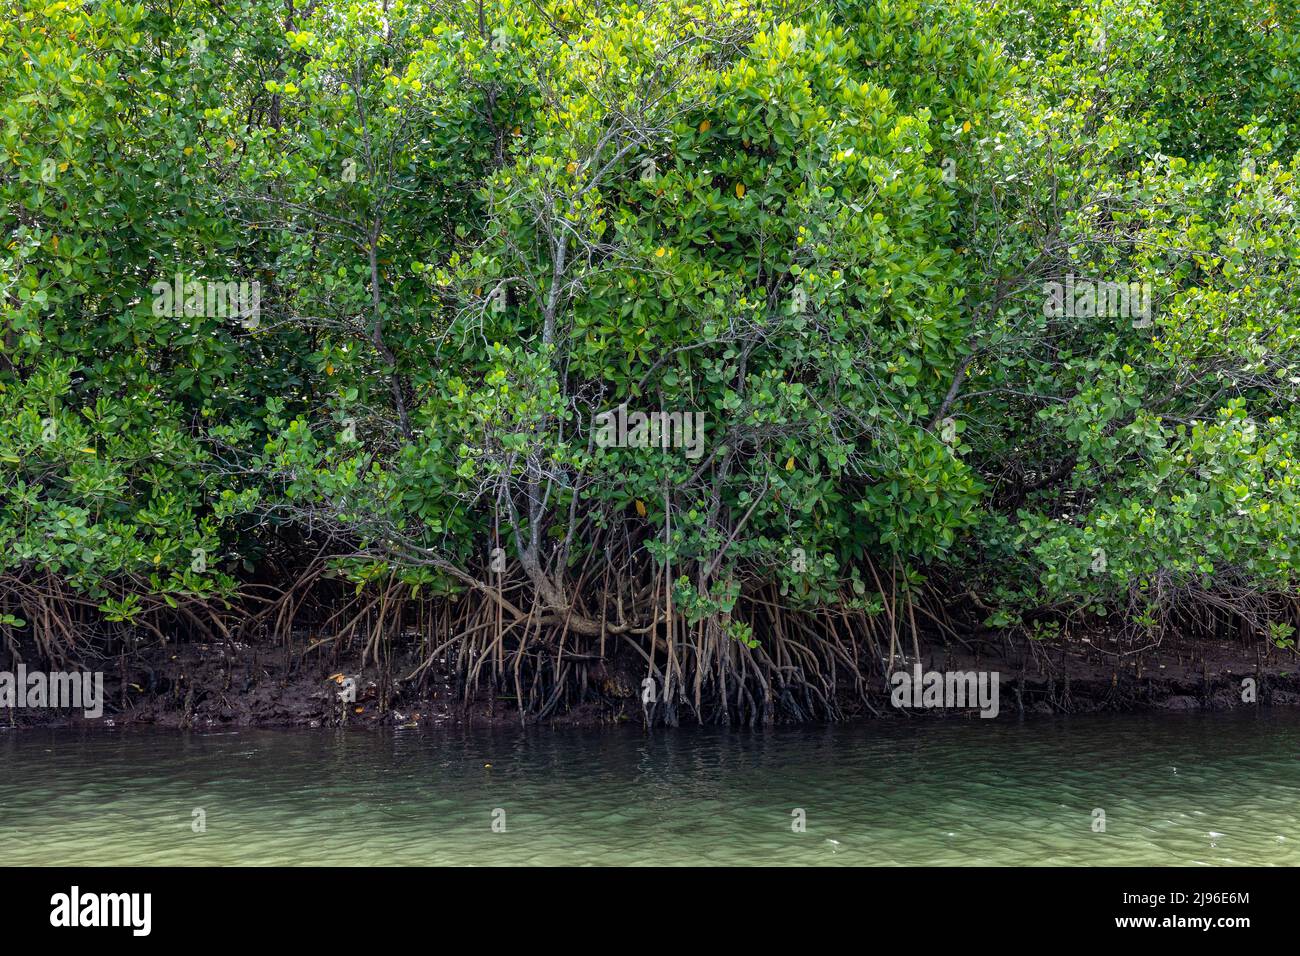 Close-up of mangroves growing on shallow parts of land in the middle of Karli River, Devbag, Malvan, Maharashtra, India Stock Photo